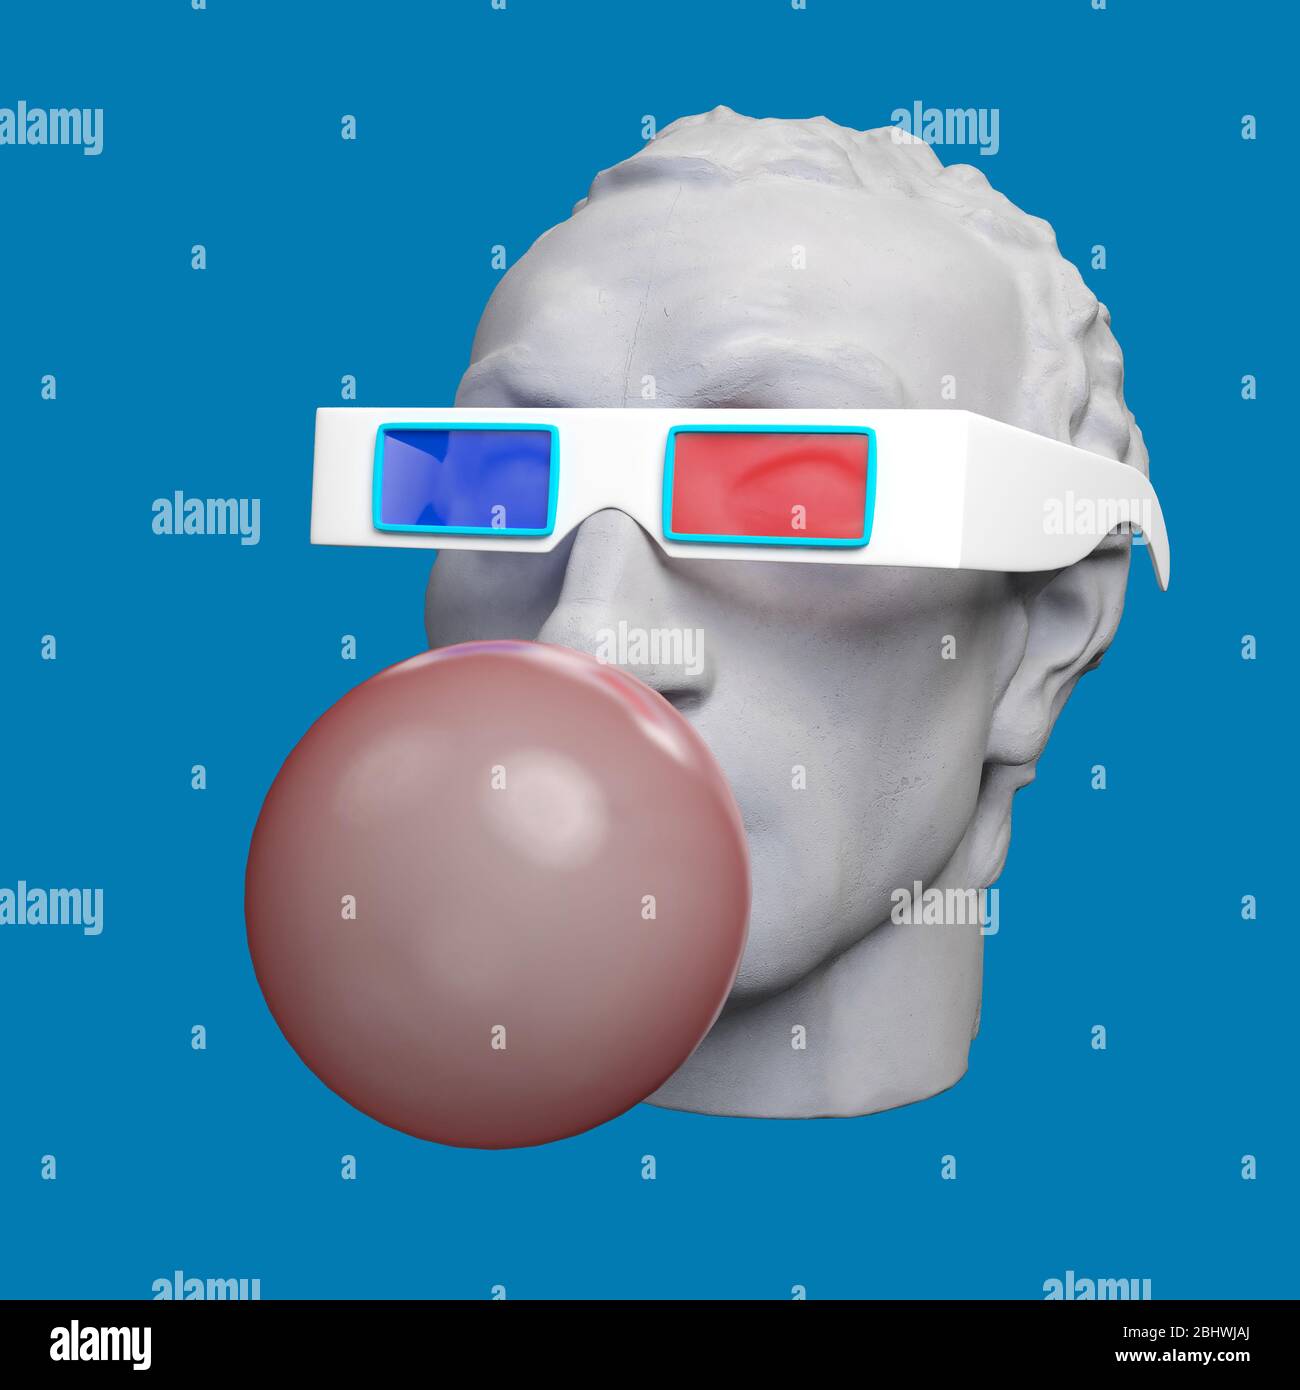 Funny illustration from 3d rendering of classical head sculpture blowing a pink chewing gum bubble. Isolated on blue background. Stock Photo